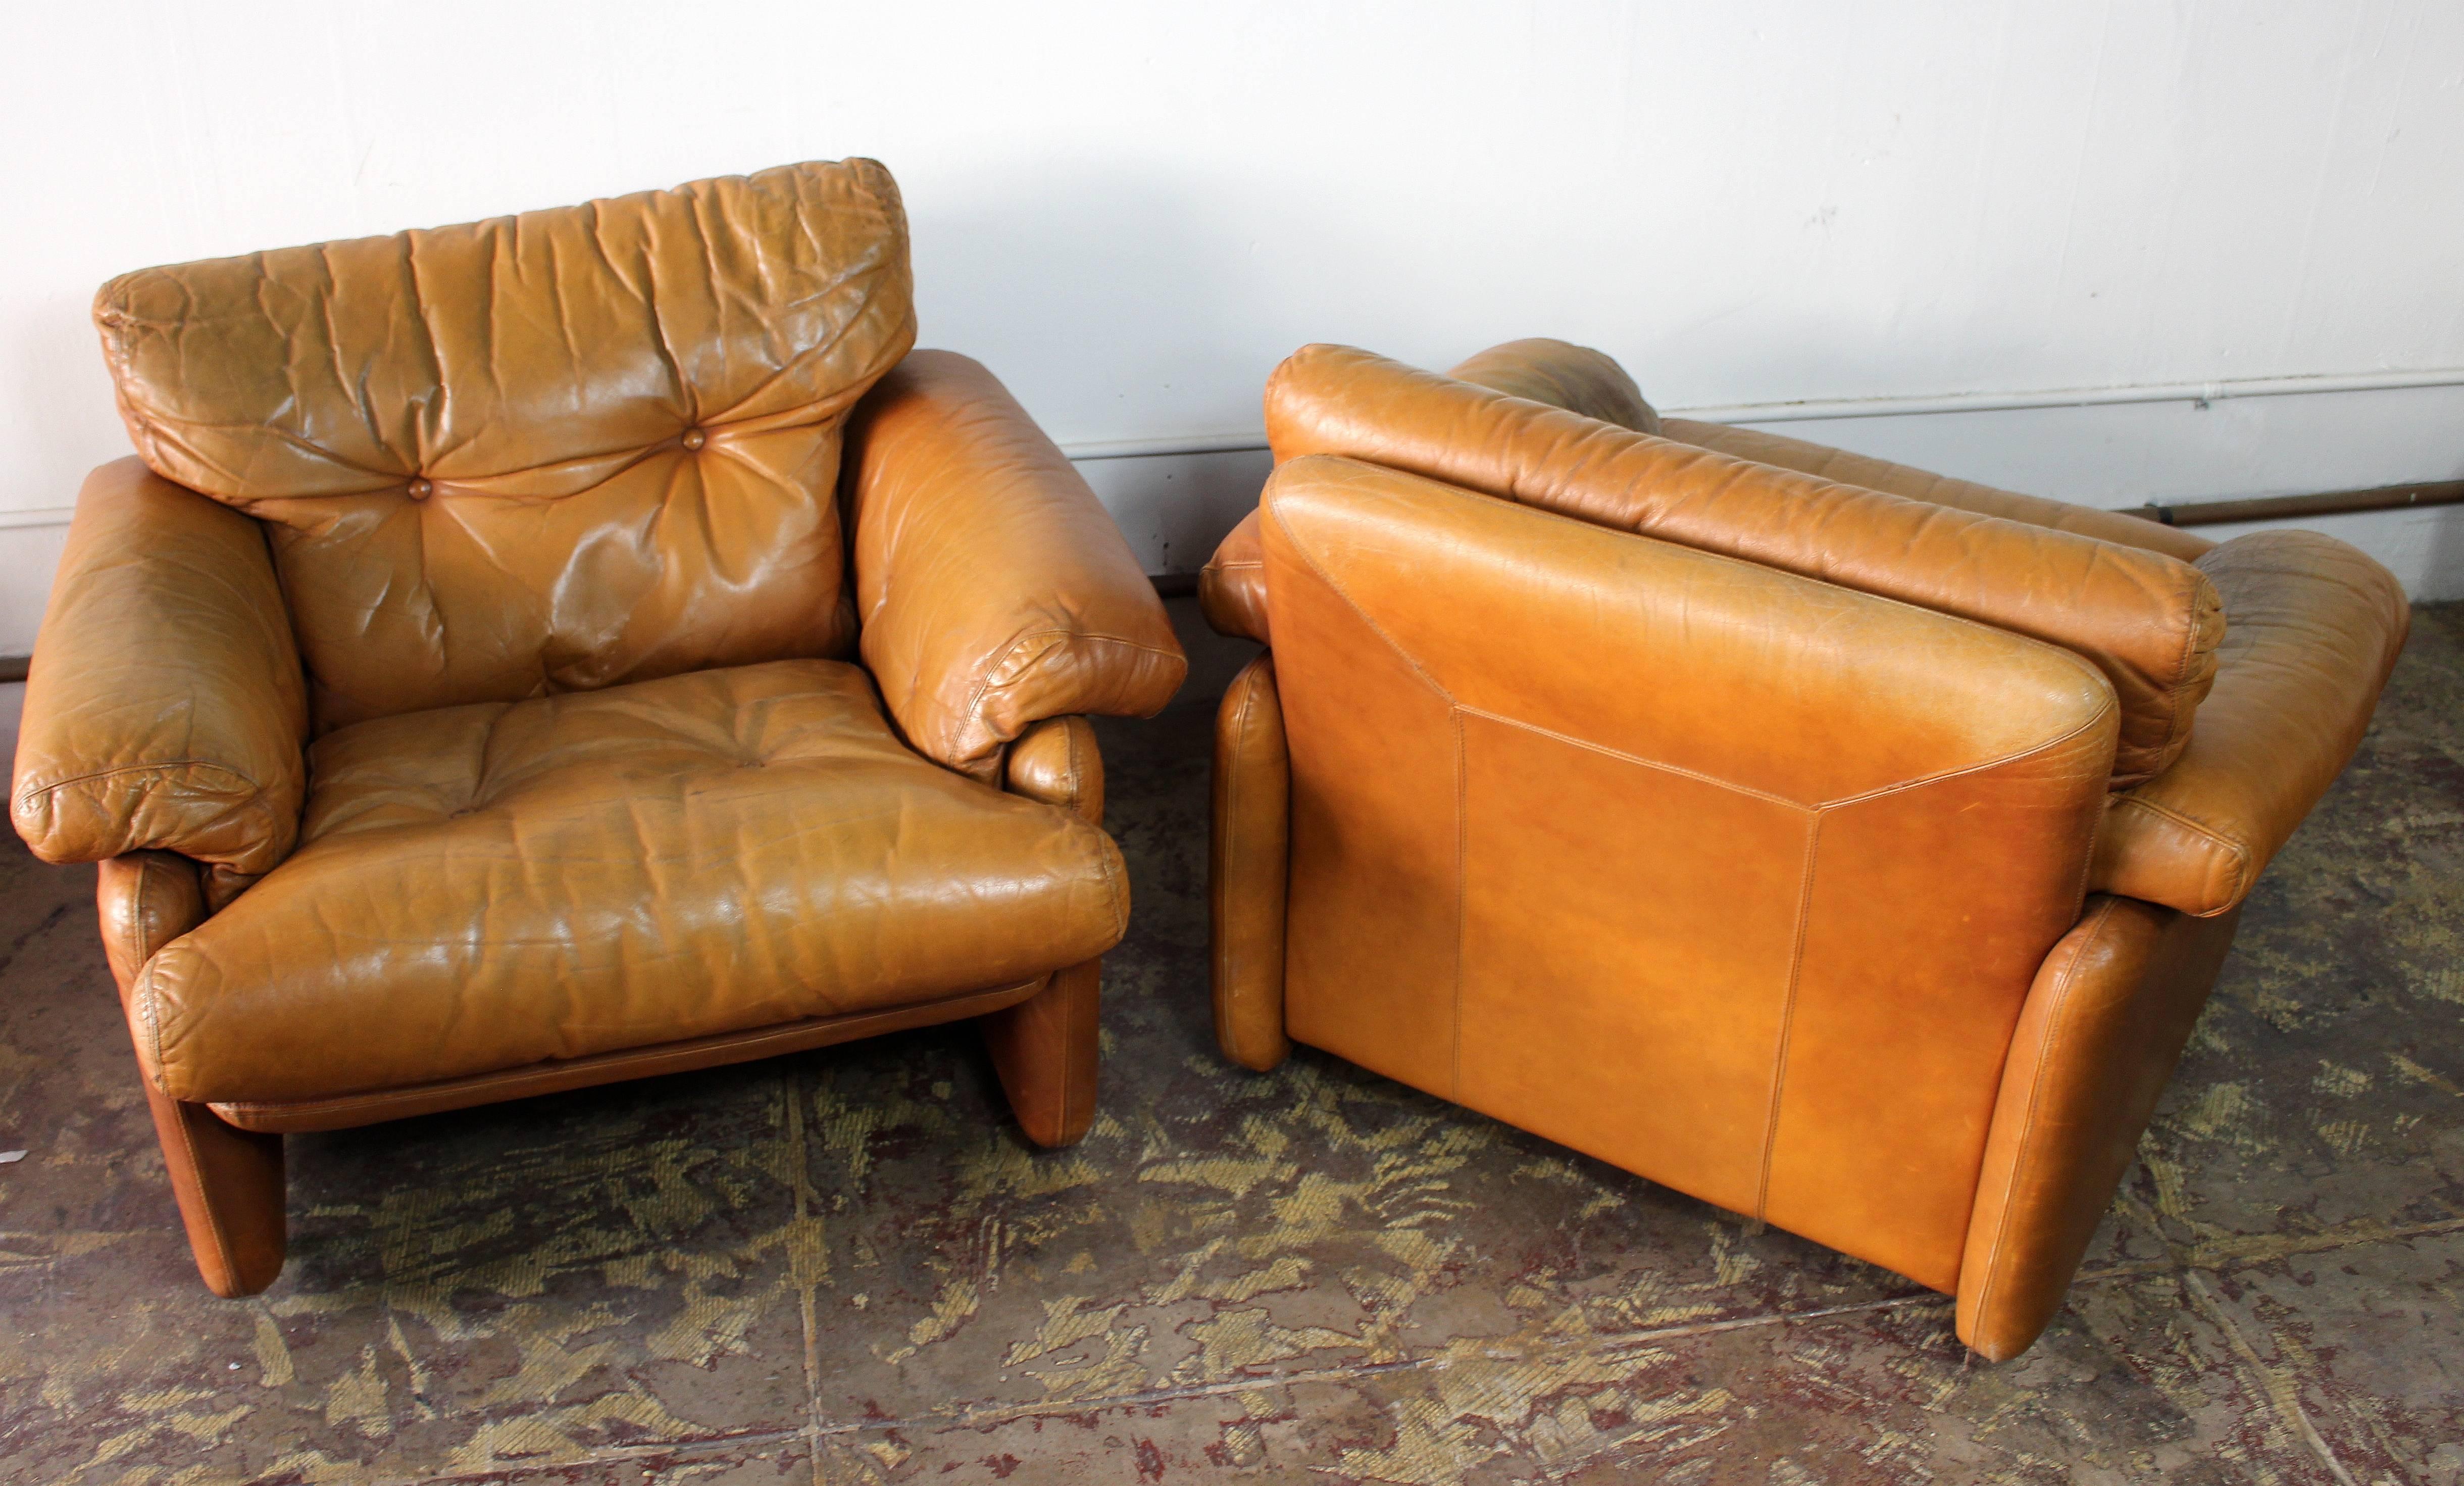 Italian pair of leather lounge chairs
cognac leather color.